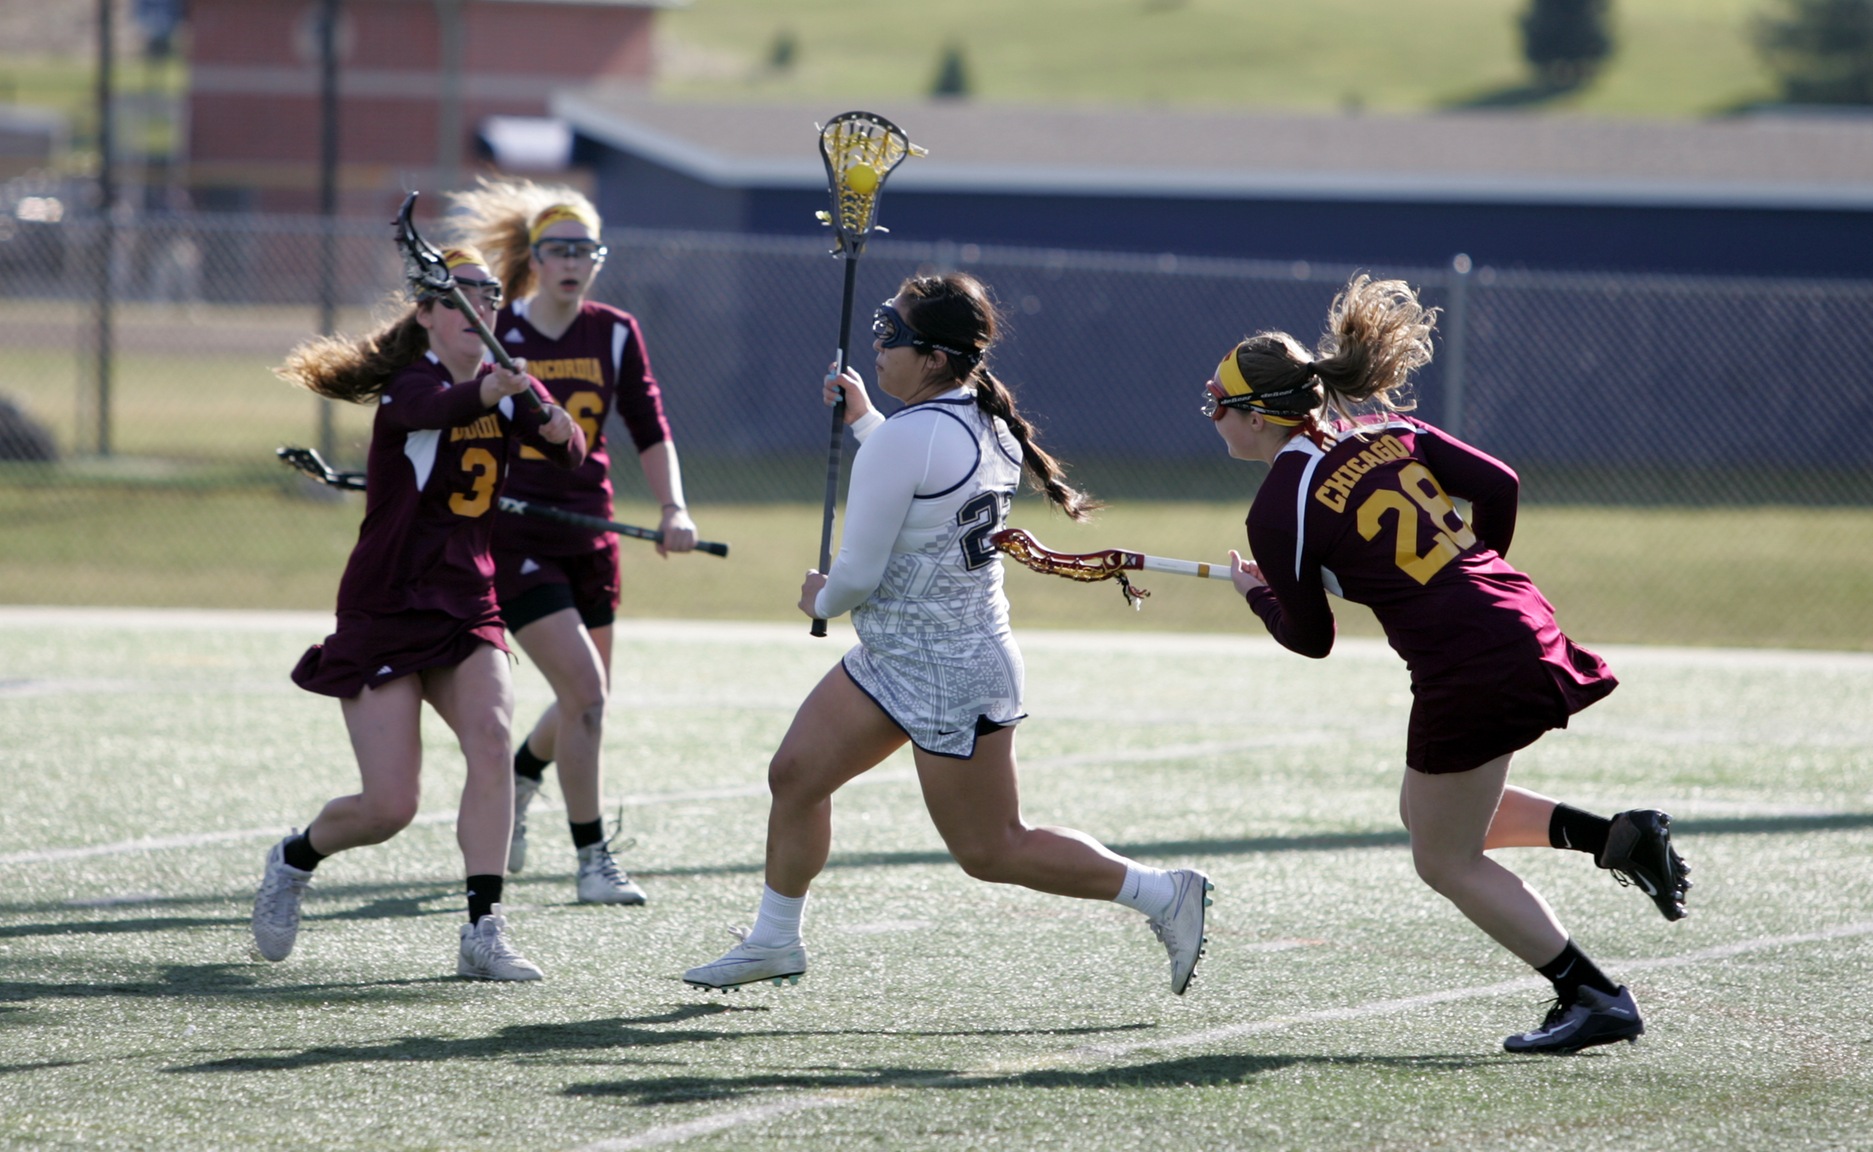 Gallego Scores Six Goals as Women's Lacrosse Falls at Franklin